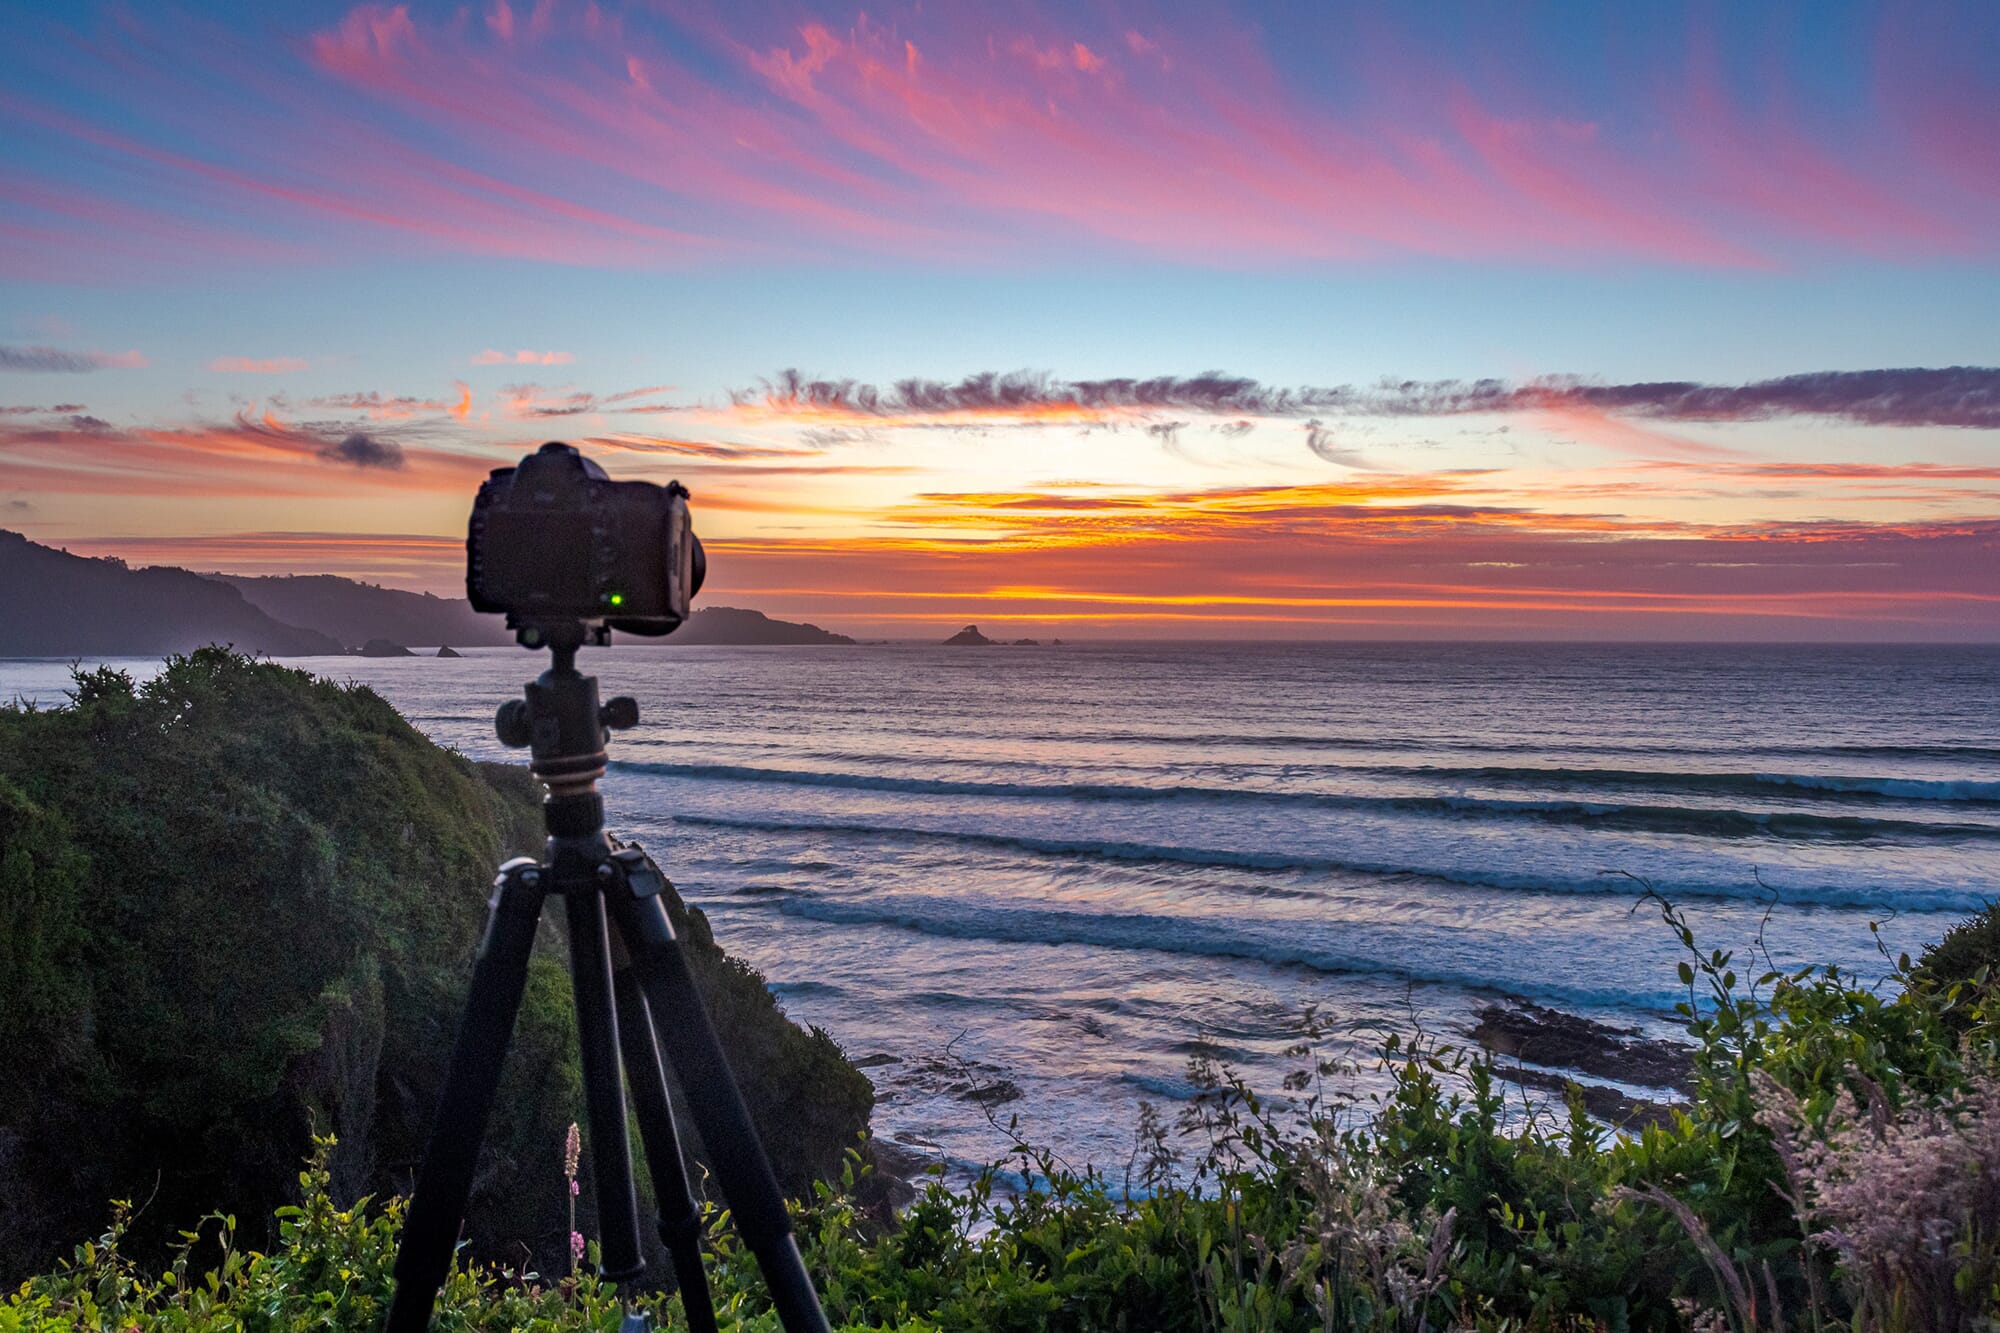 Why not get a specialist tripod for your heavy lenses?